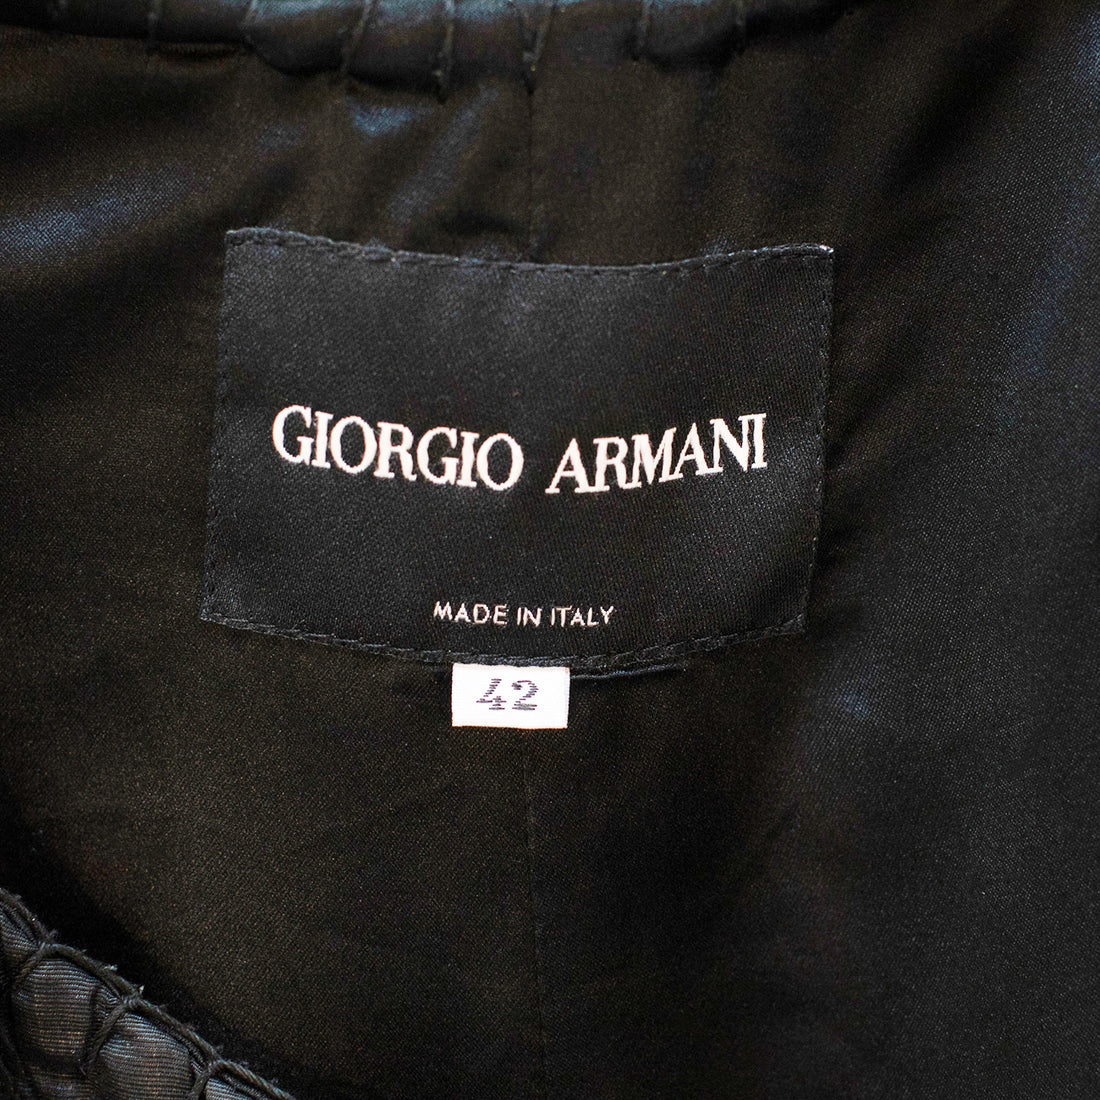 Giorgio Armani Unusual vintage quilted coat with zipper and wrap belt in oversize style